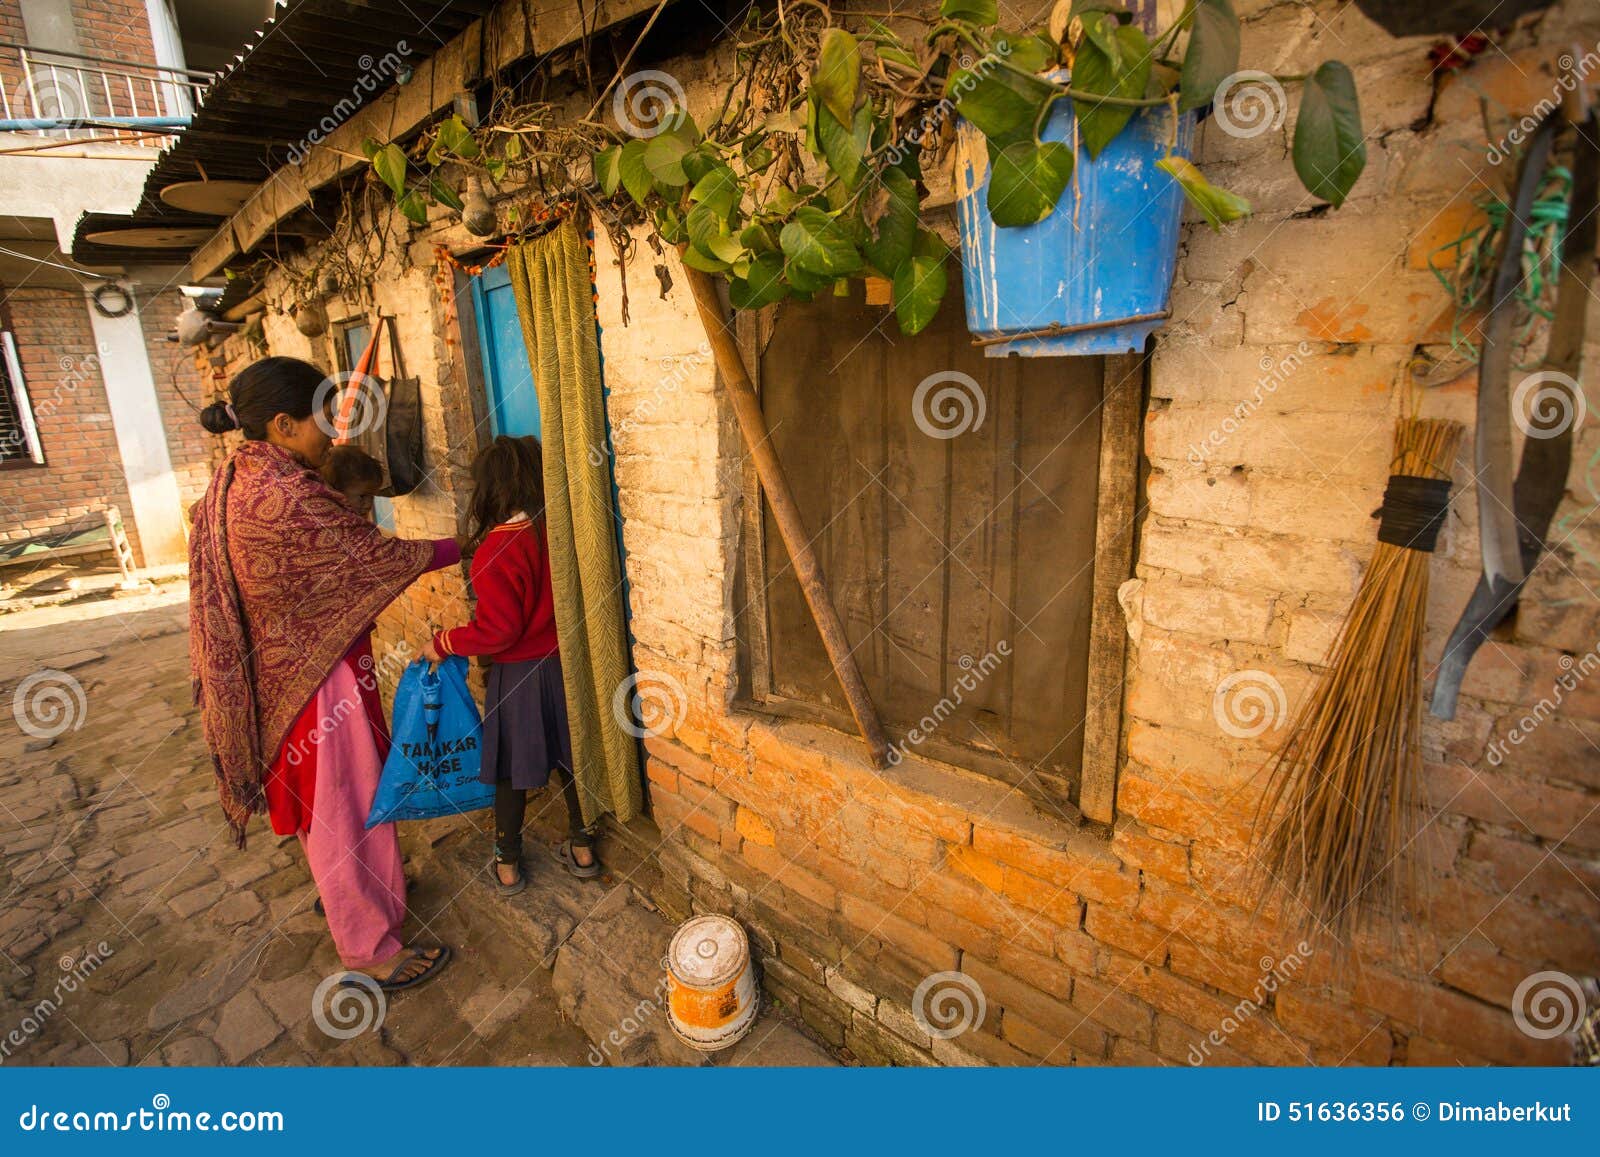 KATHMANDU, NEPAL - Local People Near Their Home in a Poor Area of the City. Editorial Photo - Image of dirt, beggar: 51636356